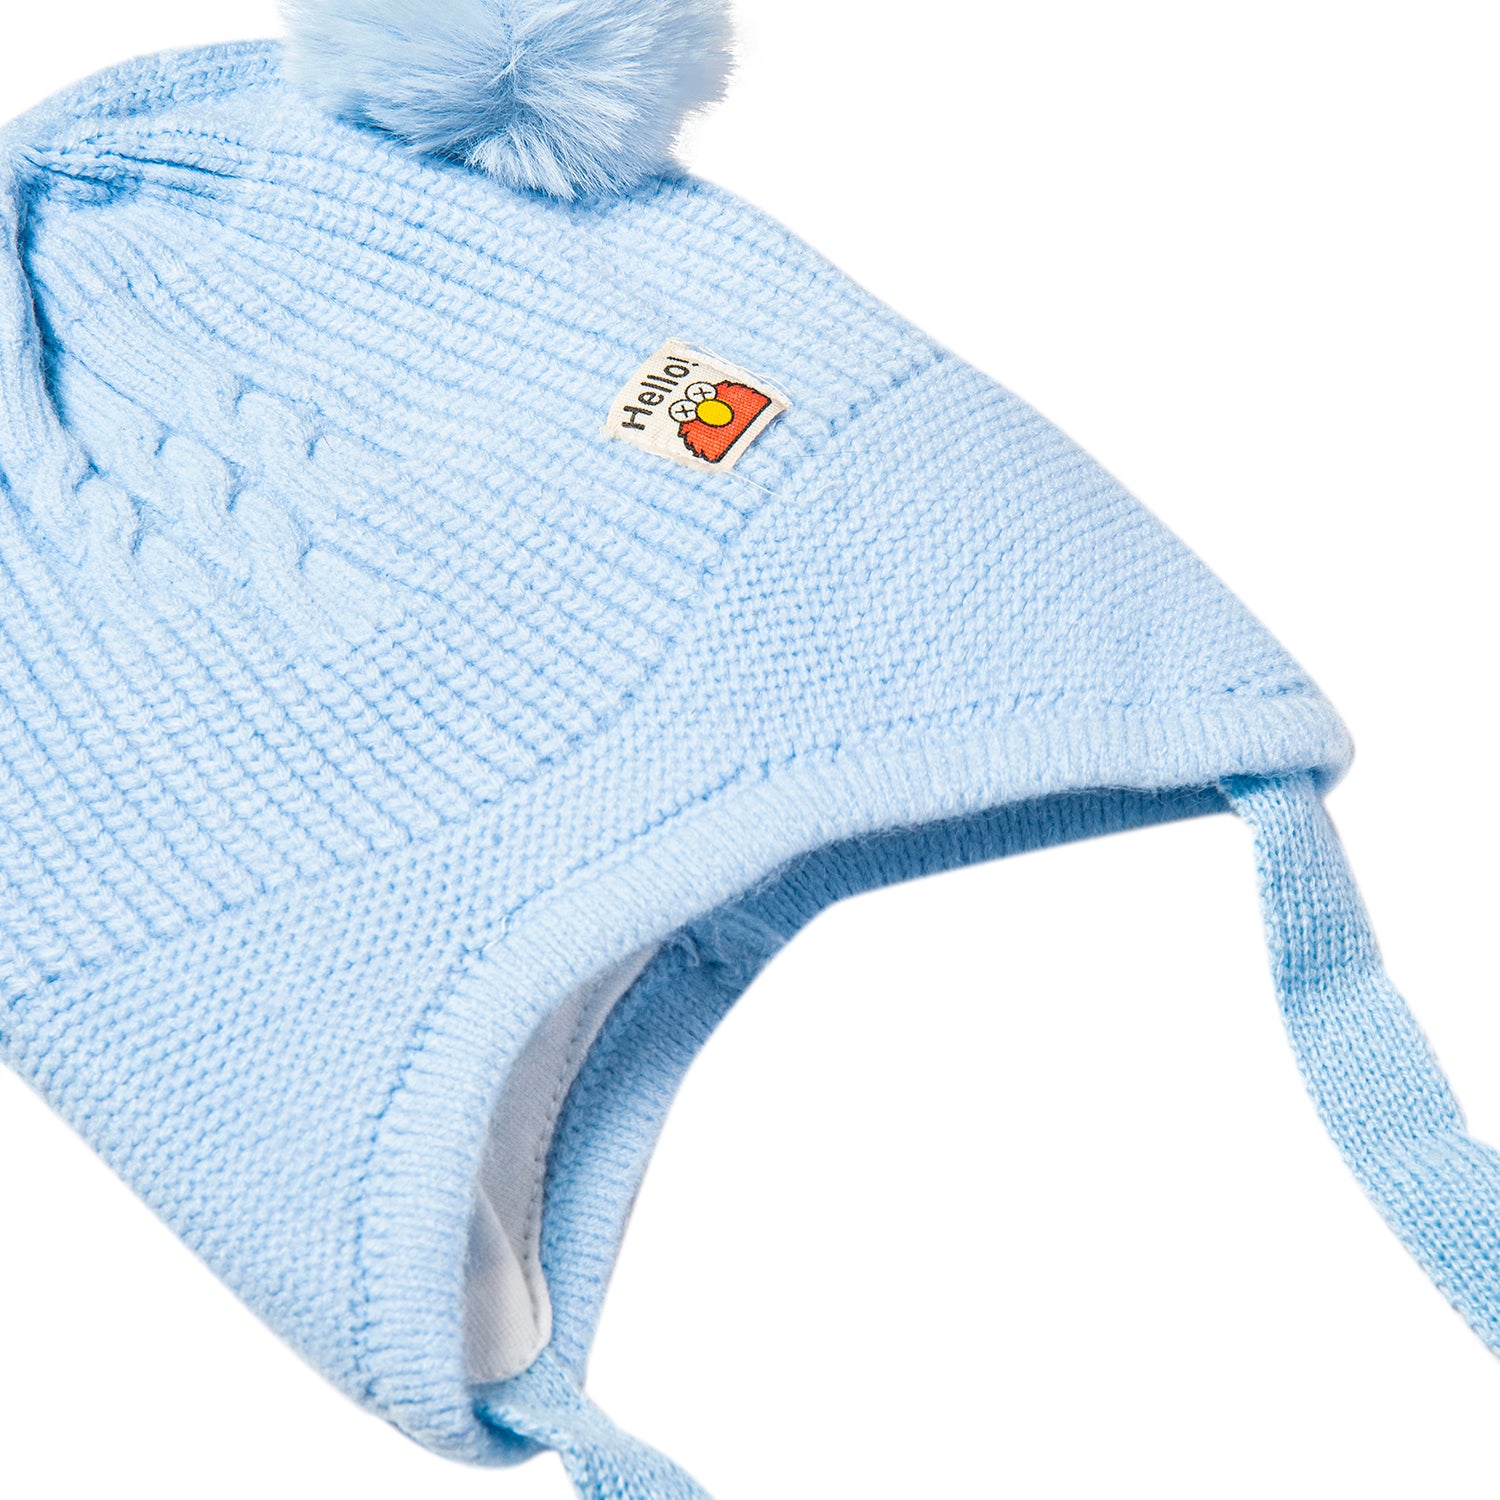 Knit Woollen Cap With Tie Knot For Ear Protection Solid Blue - Baby Moo